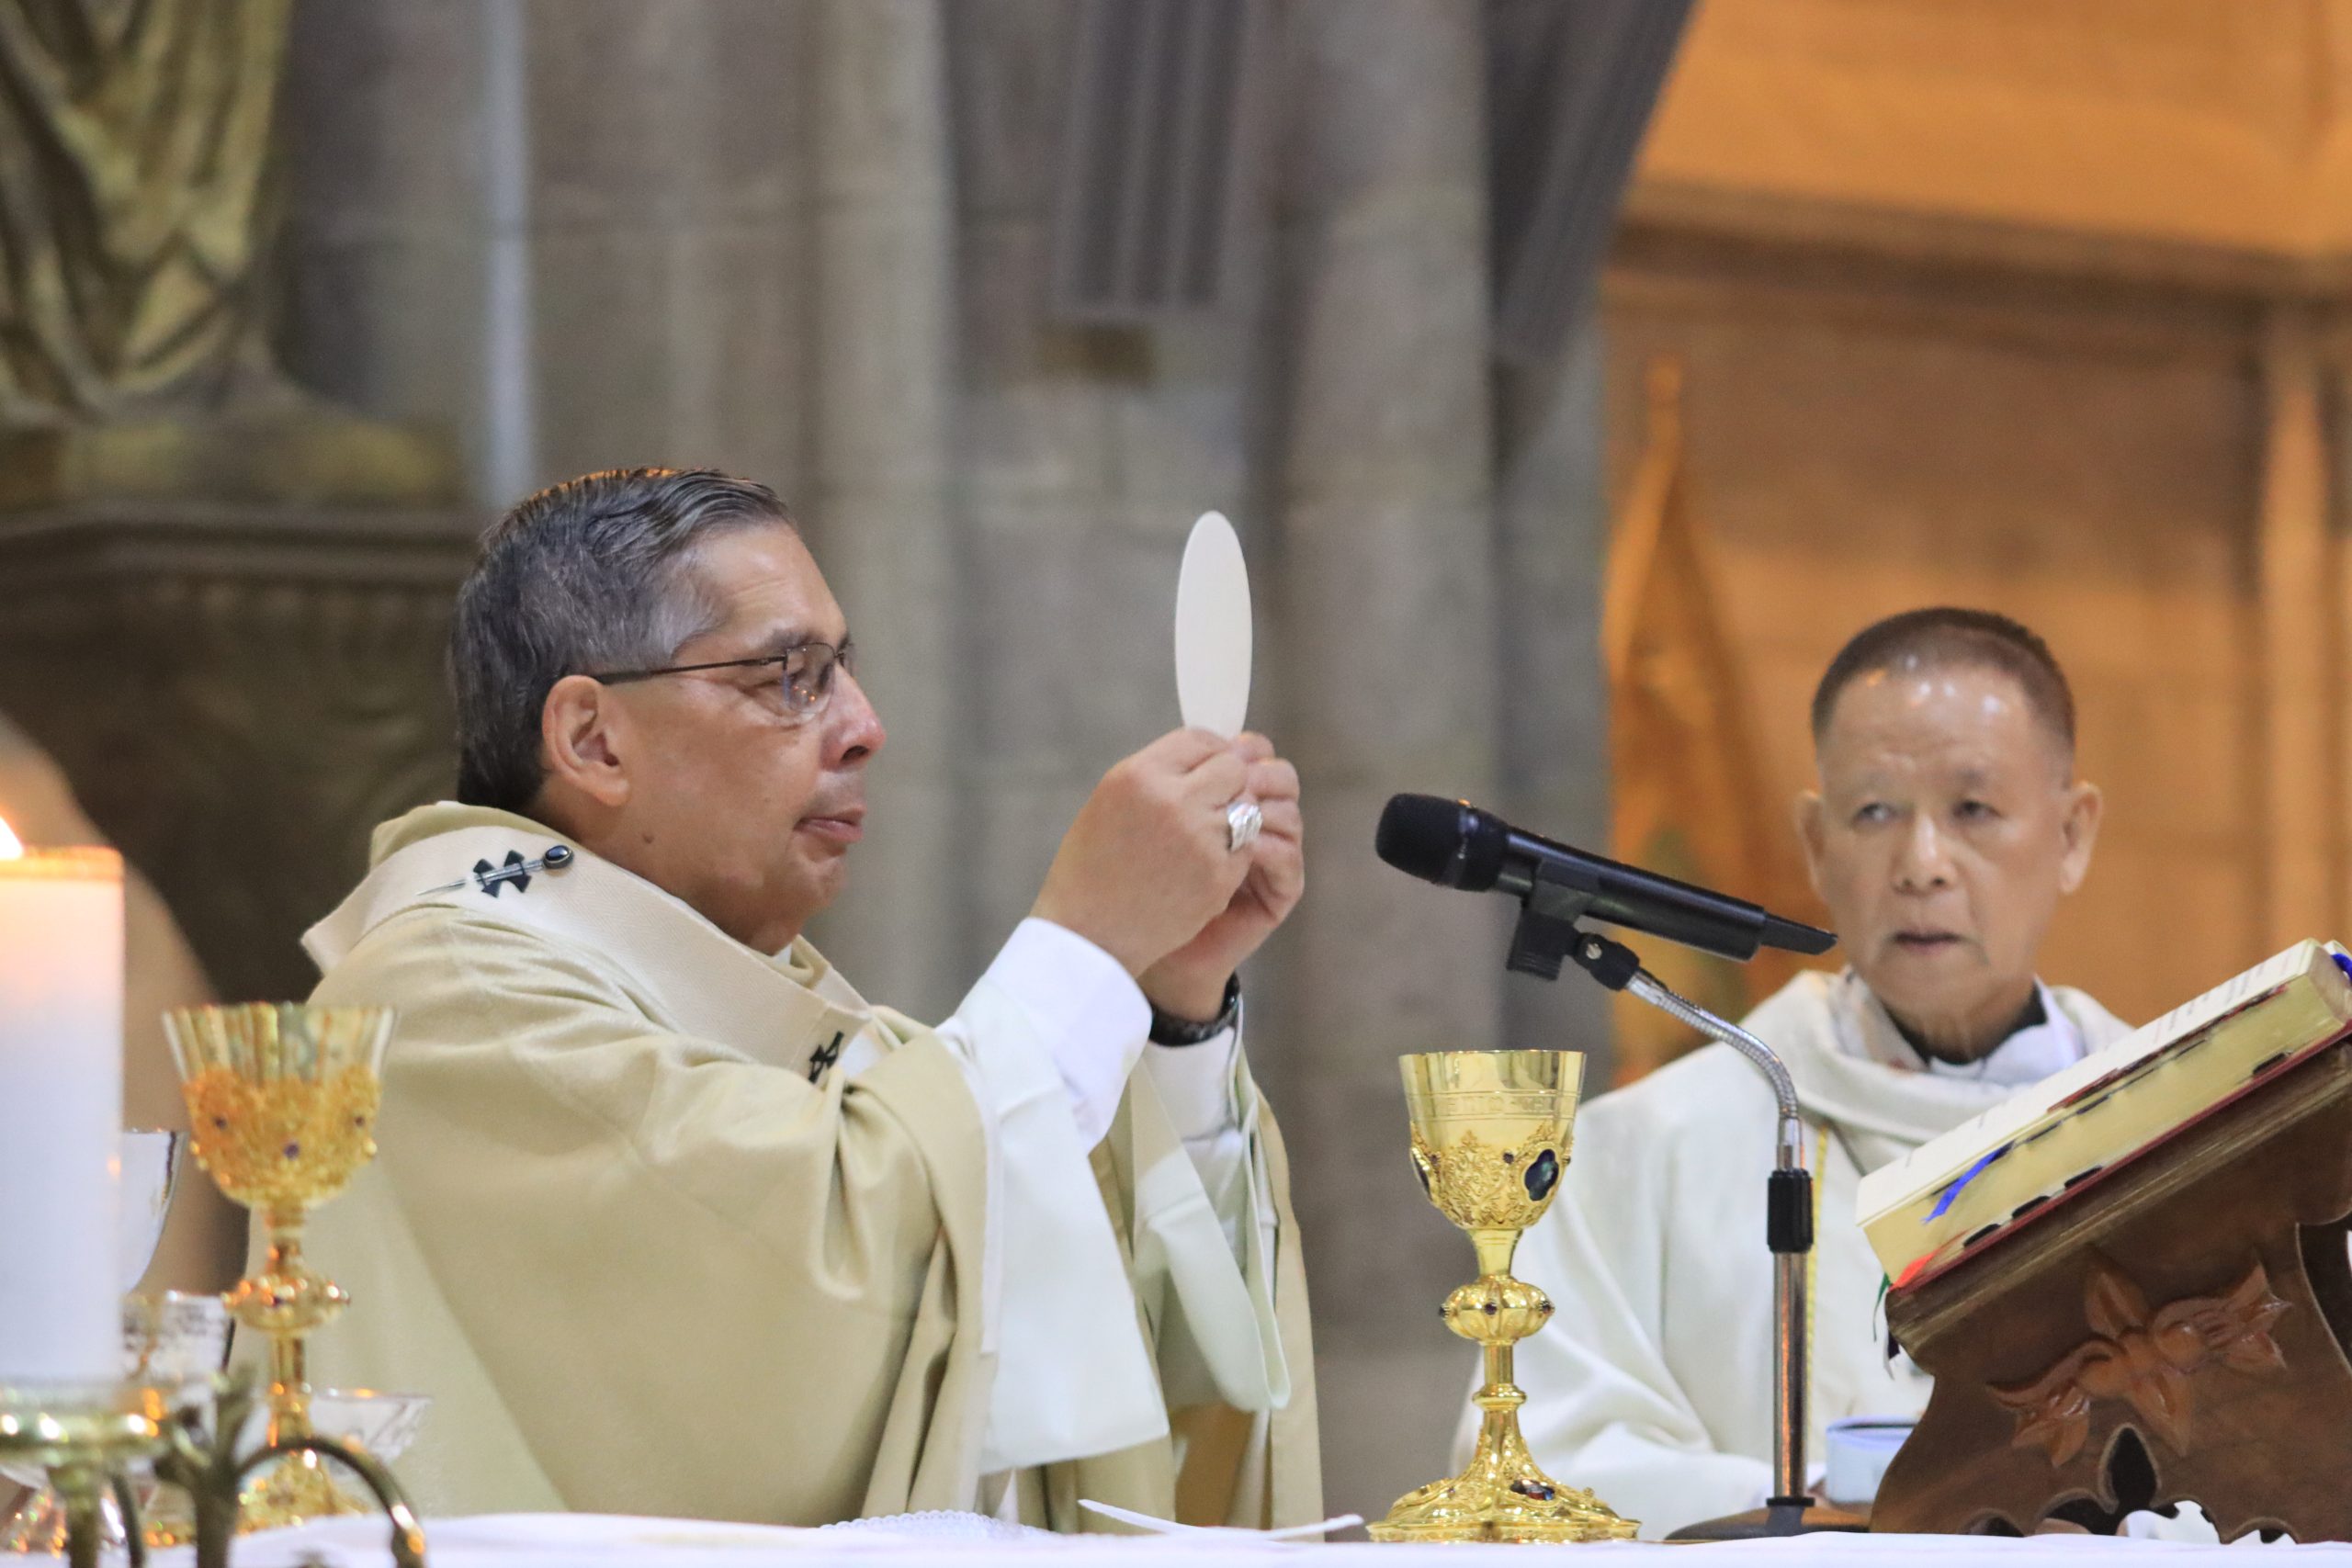 ACIPRENSA – Archbishop of Quito: The pierced Heart of Jesus heals hatred and violence.